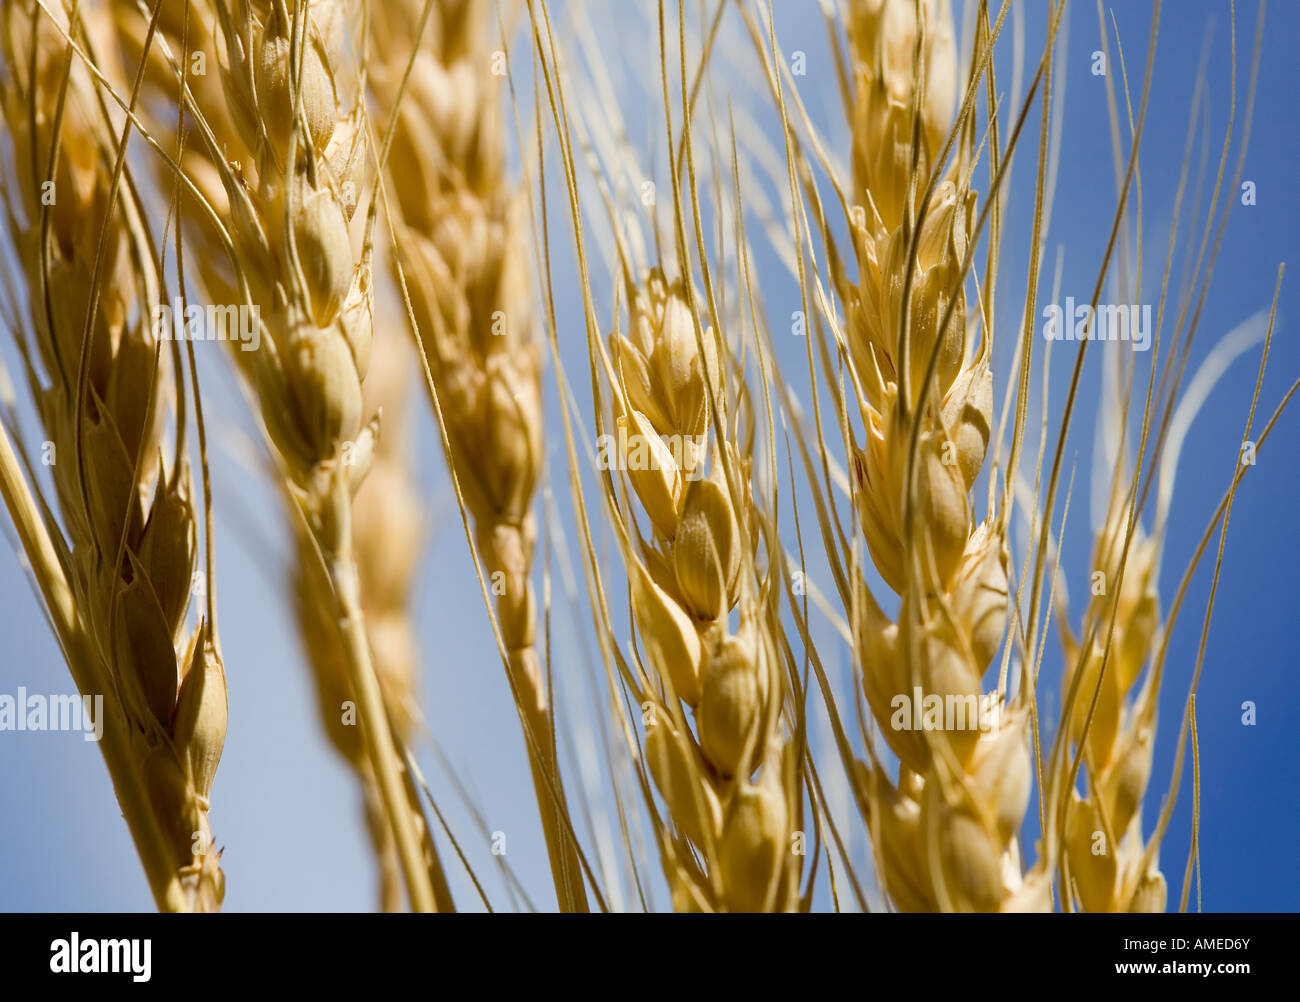 Stalks of Wheat against a Blue Sky Stock Photo